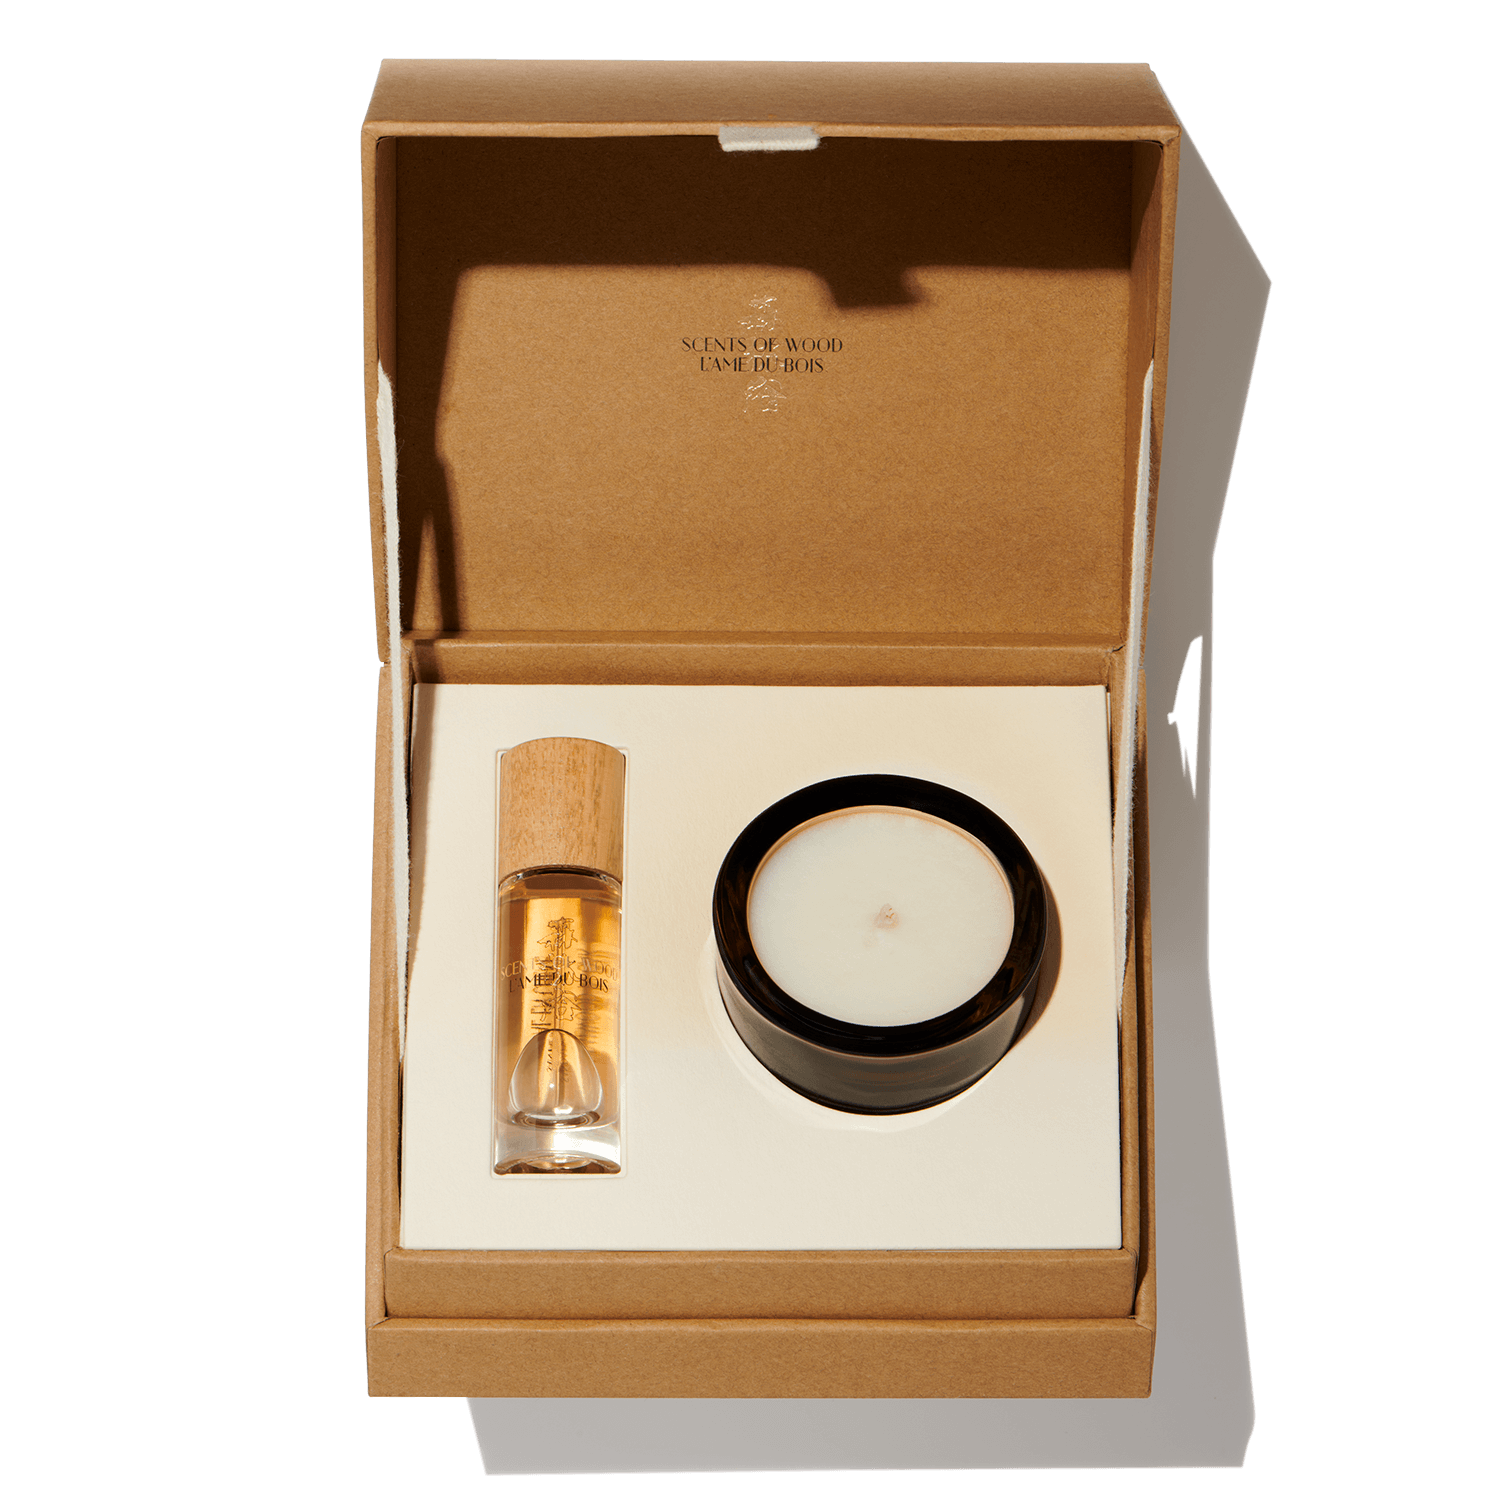 Scents of Wood Cypress in Oak Scent & Candle Giftset for $0.00 | Scentbird